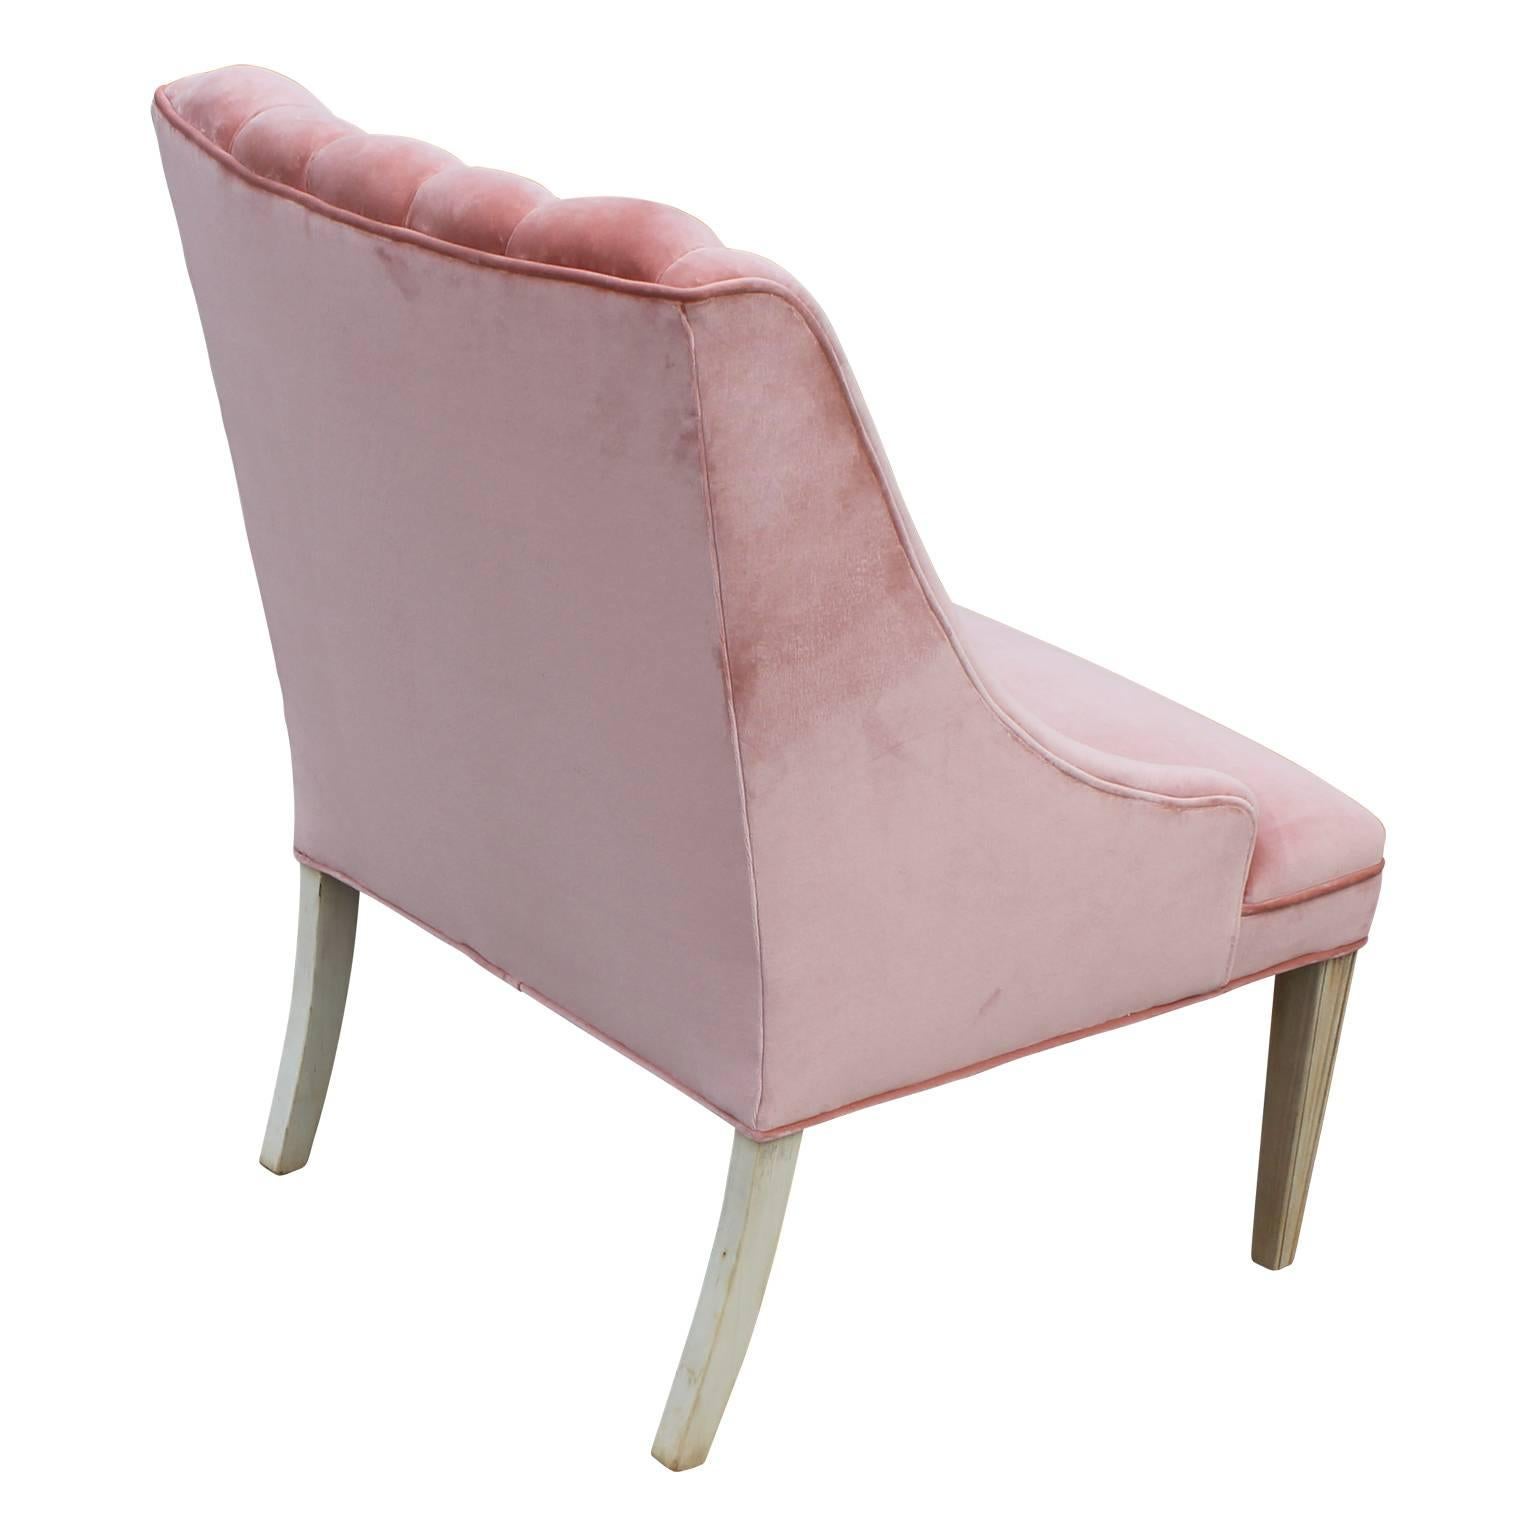 Mid-20th Century Modern Pink Velvet and Bleached Wood Dunbar Style Channeled Lounge Chair